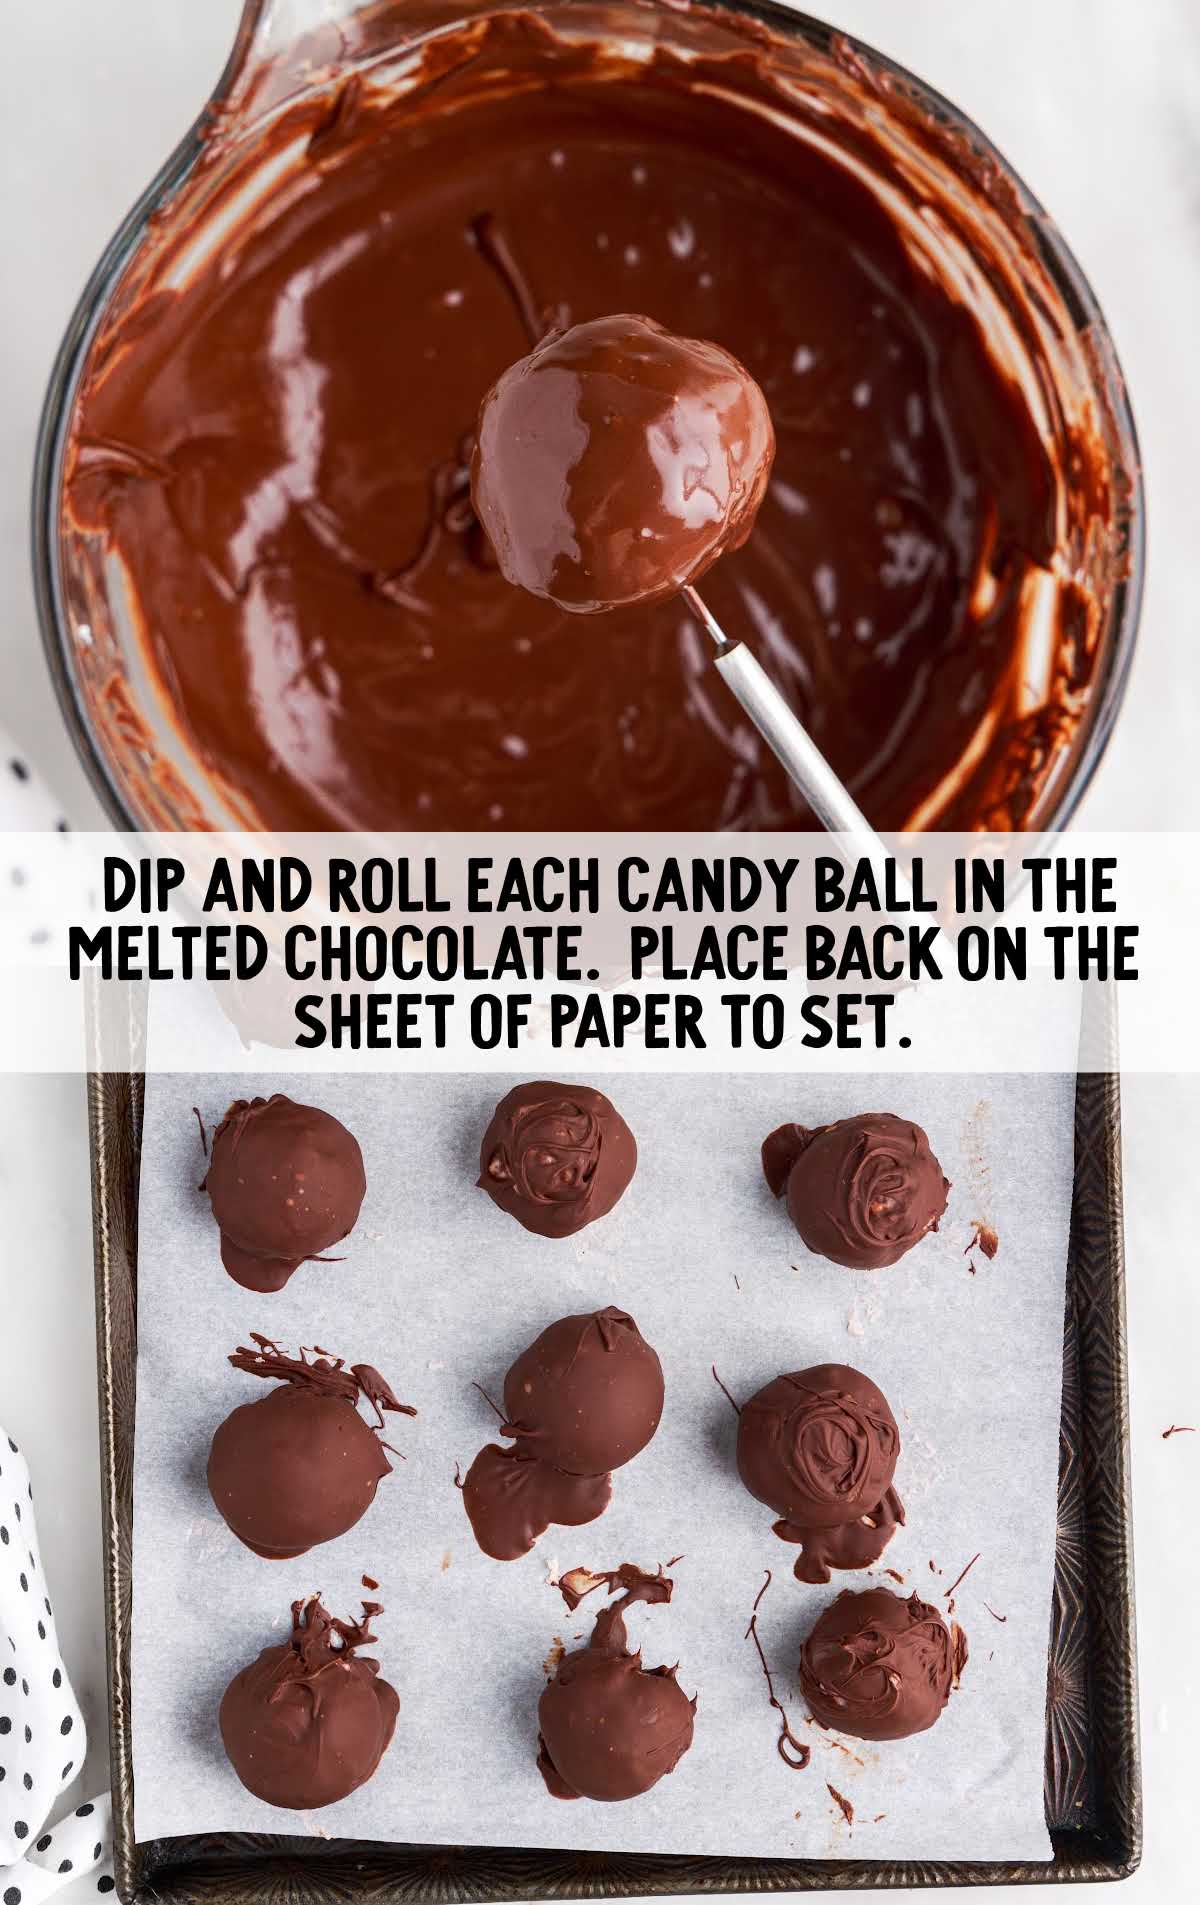 candy balls dipped into the melted chocolate mixture and placed on a baking sheet